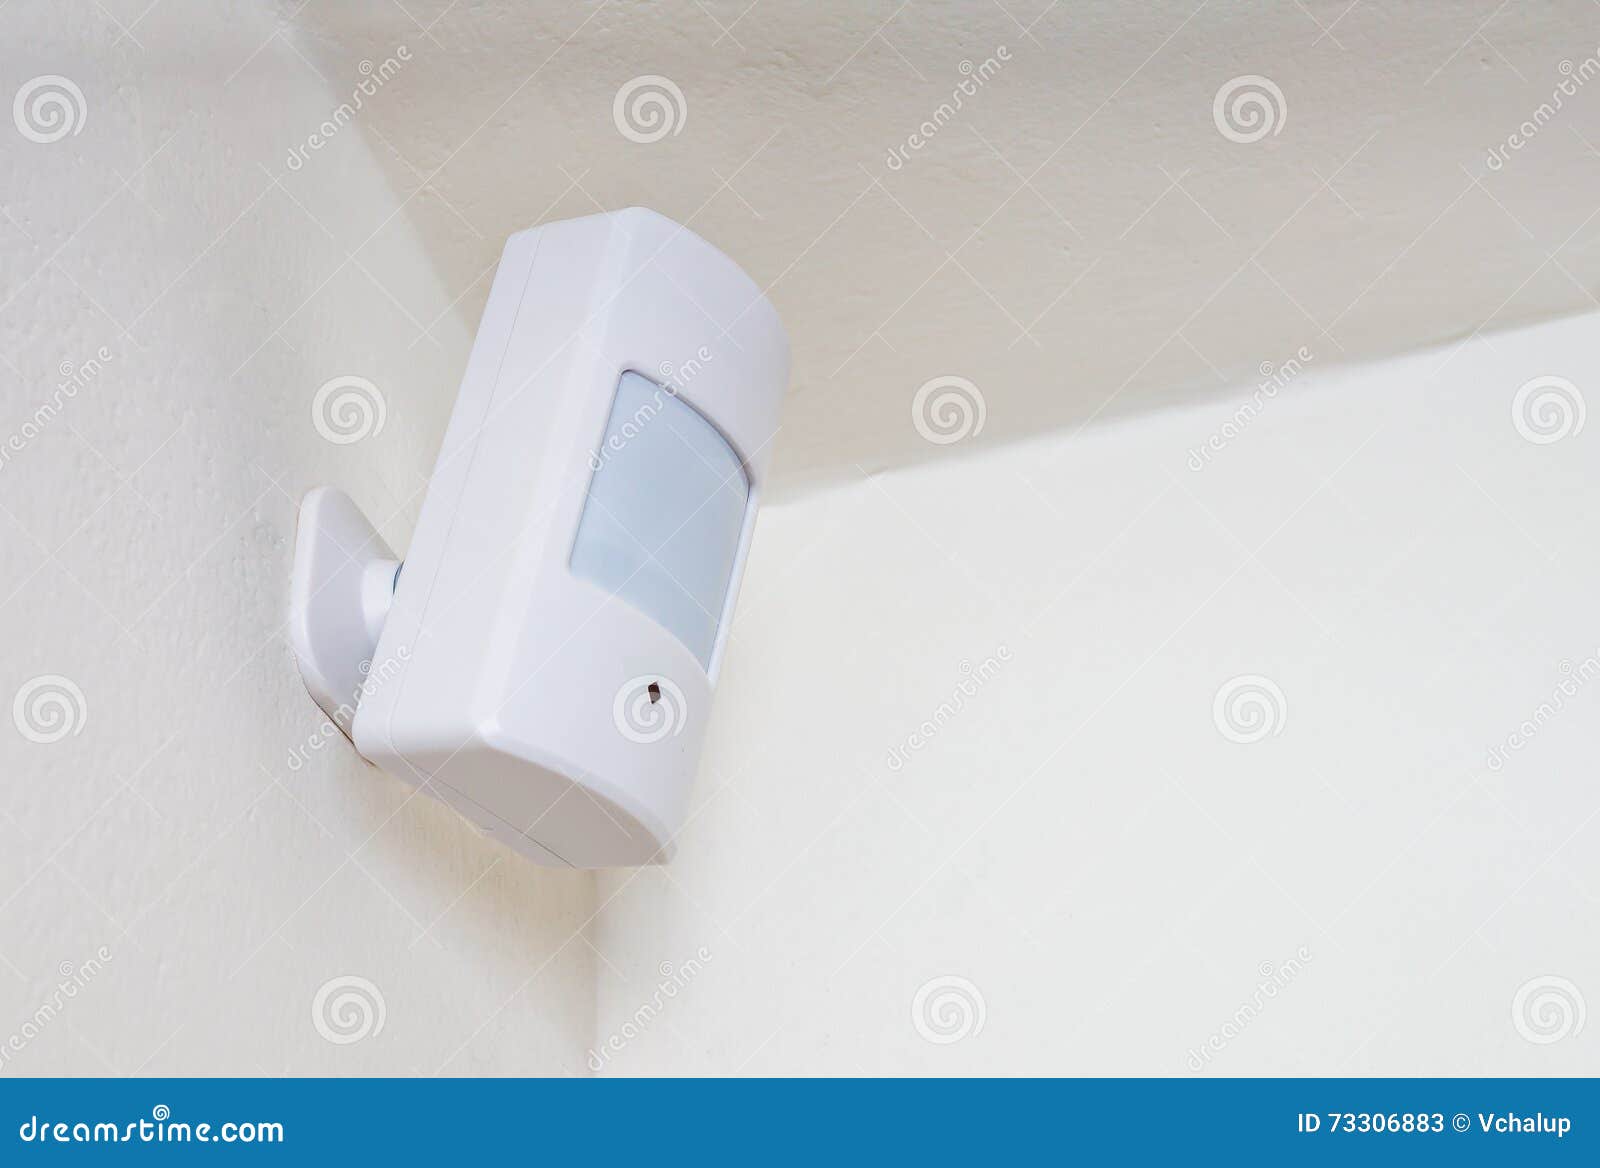 motion sensor or detector for security system mounted on wall